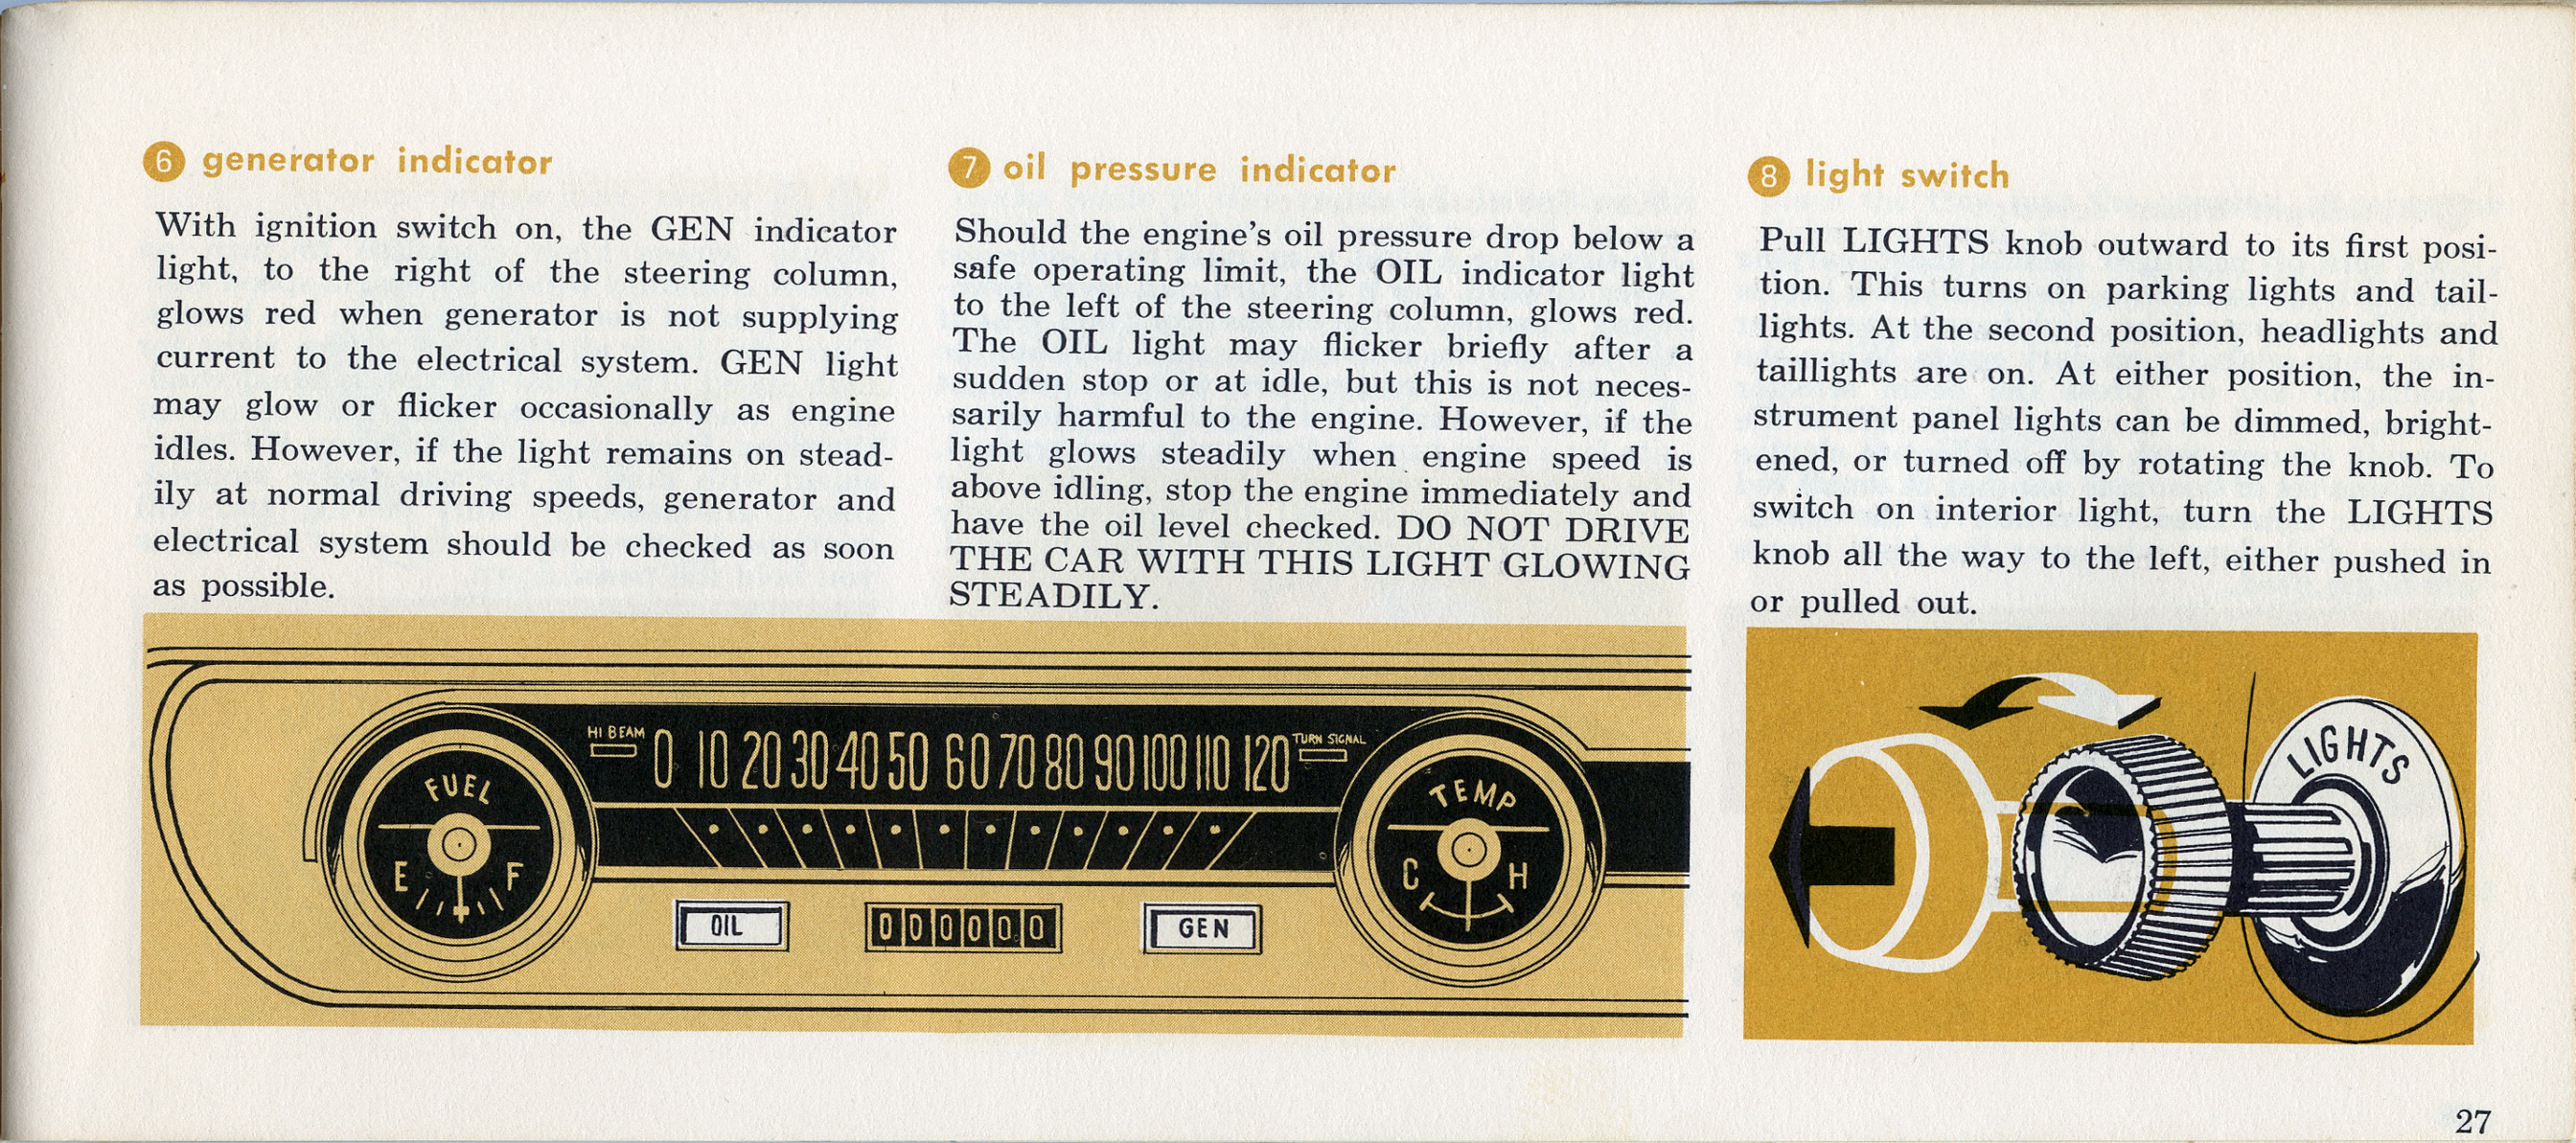 1964_Ford_Falcon_Owners_Manual-27